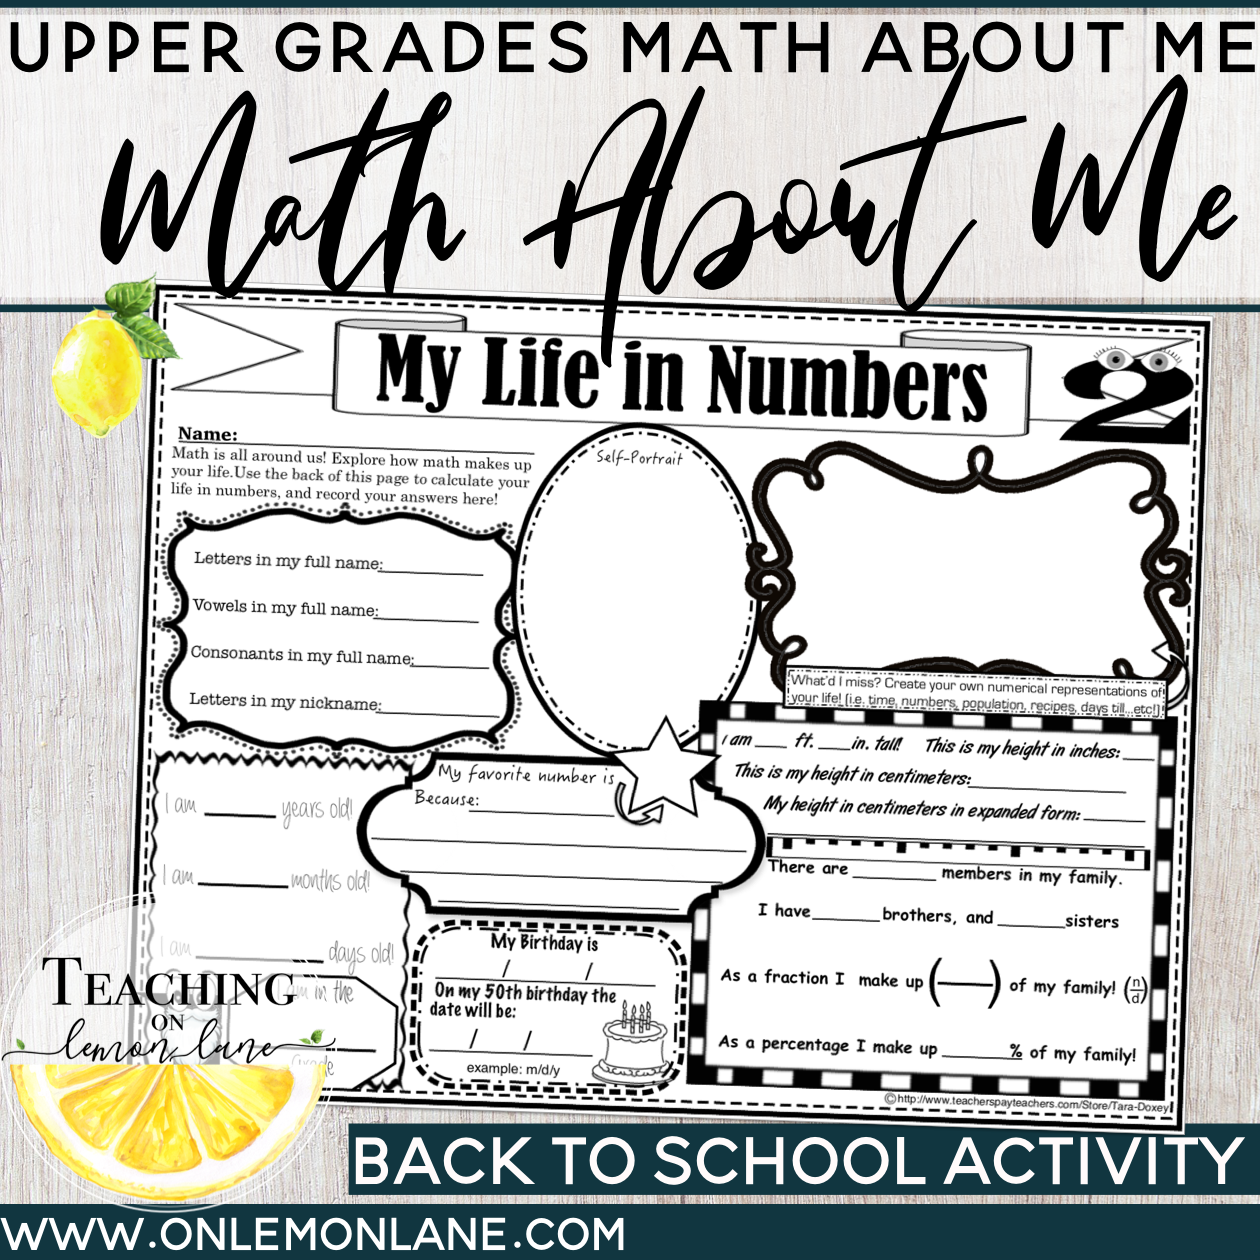 back-to-school-math-all-about-me-get-to-know-you-first-day-upper-grades